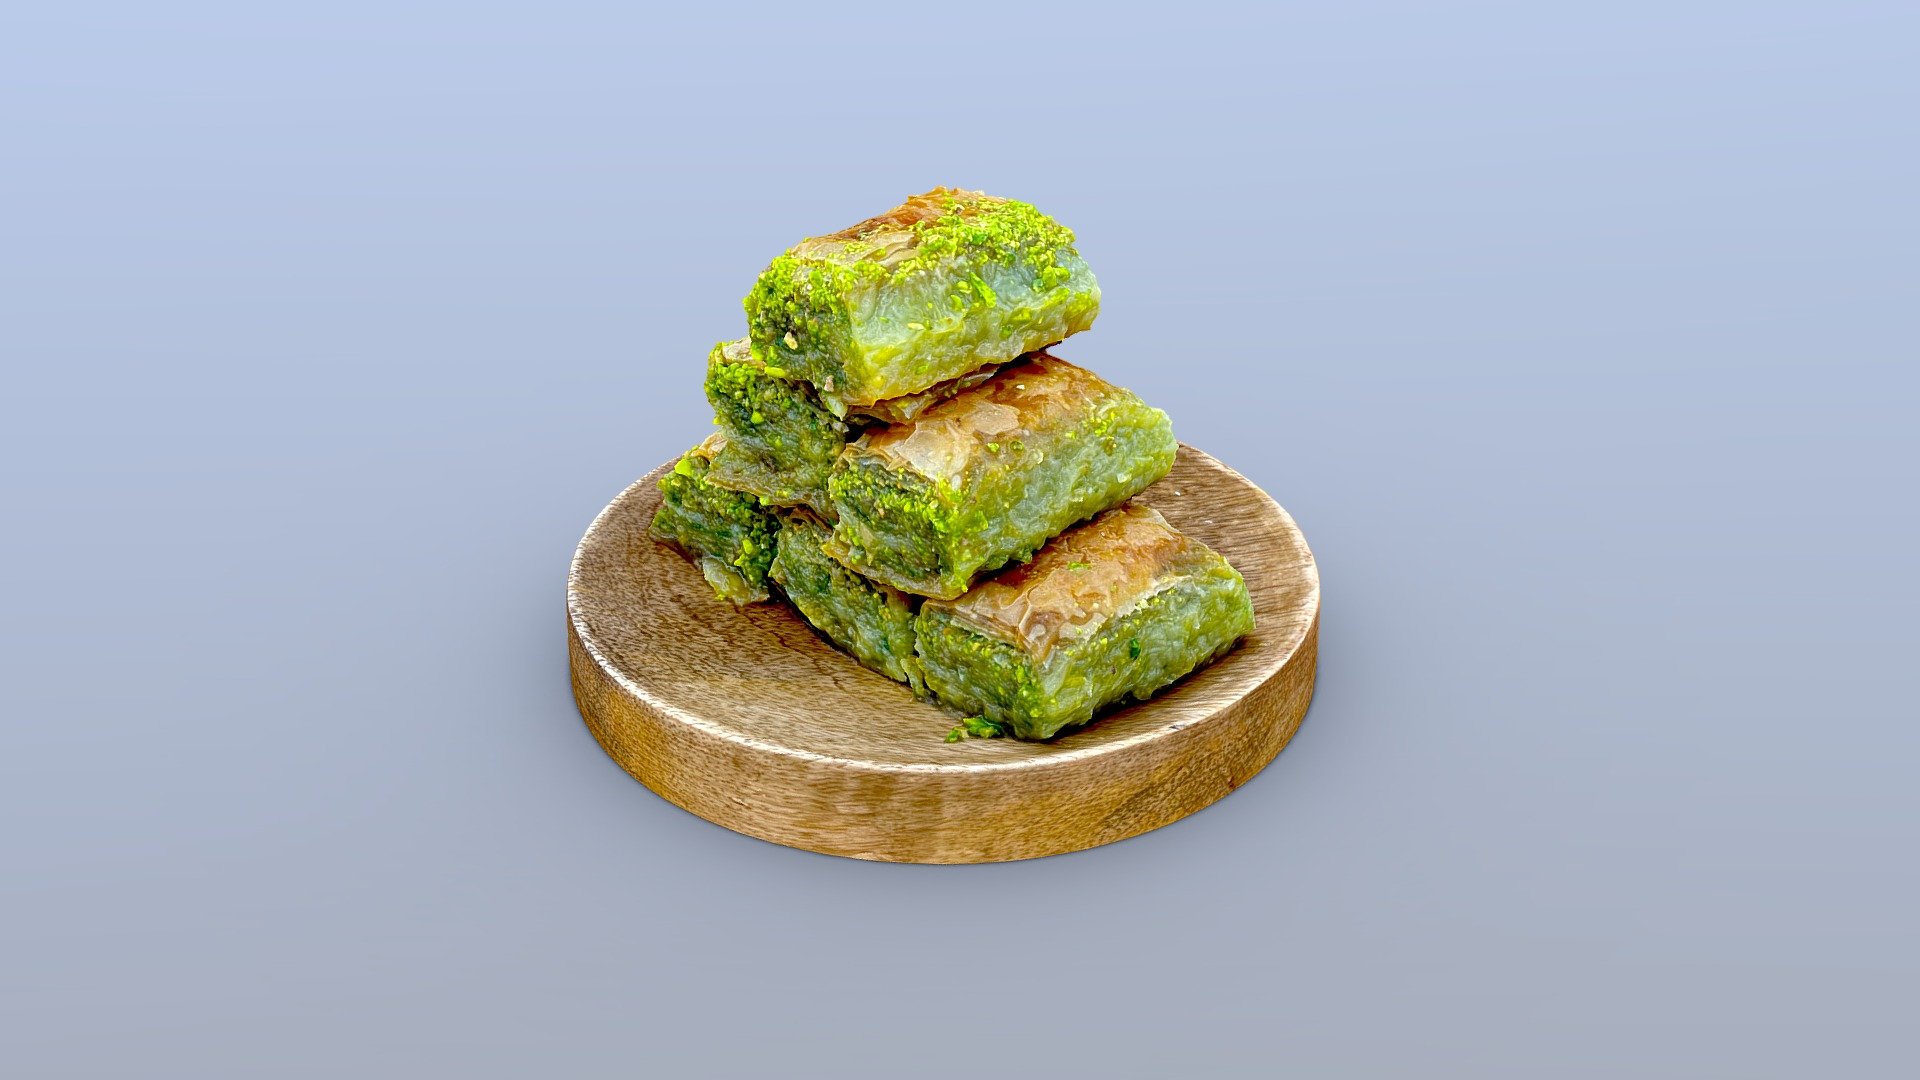 Cooking Through History: Ottoman Empire

The origin of baklava, including the pistachio variant, is often contested among Middle Eastern, Mediterranean, and Central Asian countries, each claiming the delicacy as their own. Its development into the layered pastry we know today likely occurred in the Ottoman Empire's imperial kitchens. Many countries have their own versions of baklava, slightly tweaking the recipe to make it unique, reflecting the rich culinary heritage and the importance of regional ingredients like pistachios.

Main ingredients: filo dough, butter, nuts, honey, spices (cinnamon, cloves, and cardamom)




Follow Zoltanfood on LinkedIn and  Instagram

Explore the Food Metaverse in AR/VR on Zoltanfood.com

Want to show support? Become a patron on Patreon
 - Pistachio Walnut Baklava - Buy Royalty Free 3D model by Zoltanfood 3d model